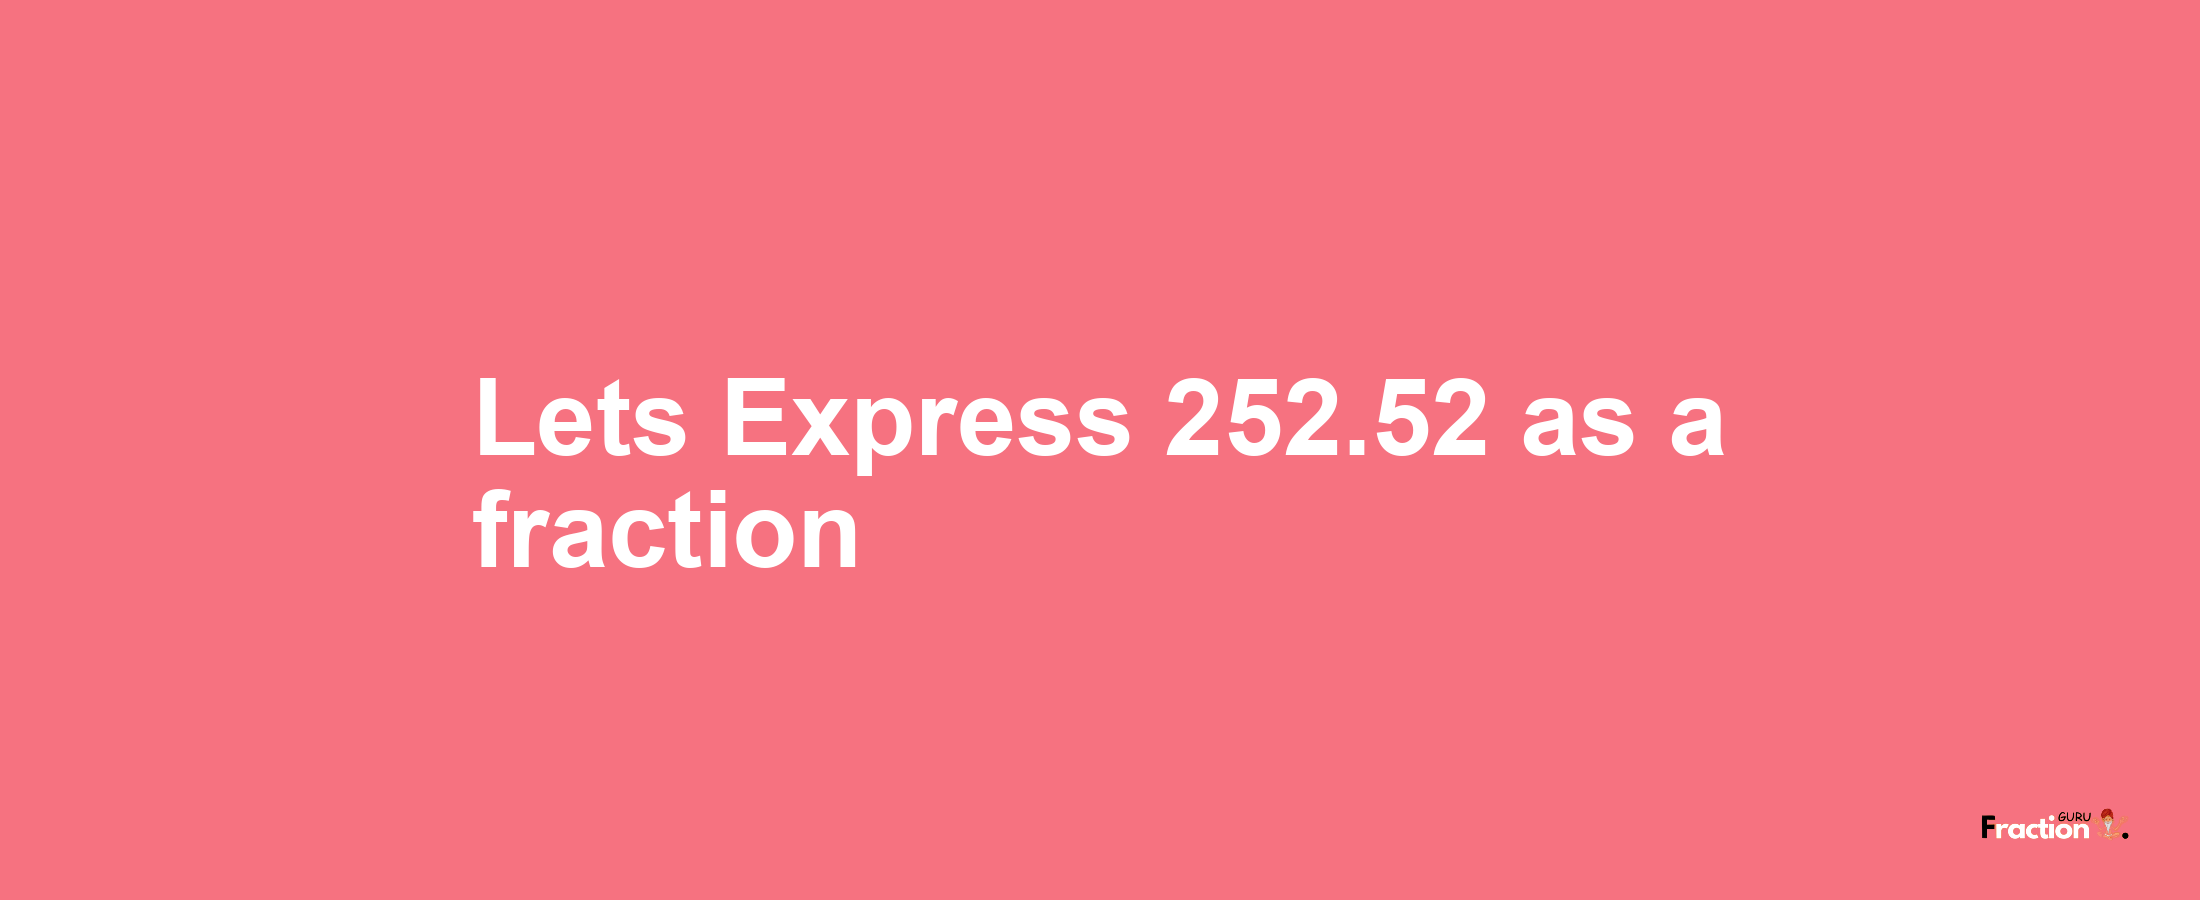 Lets Express 252.52 as afraction